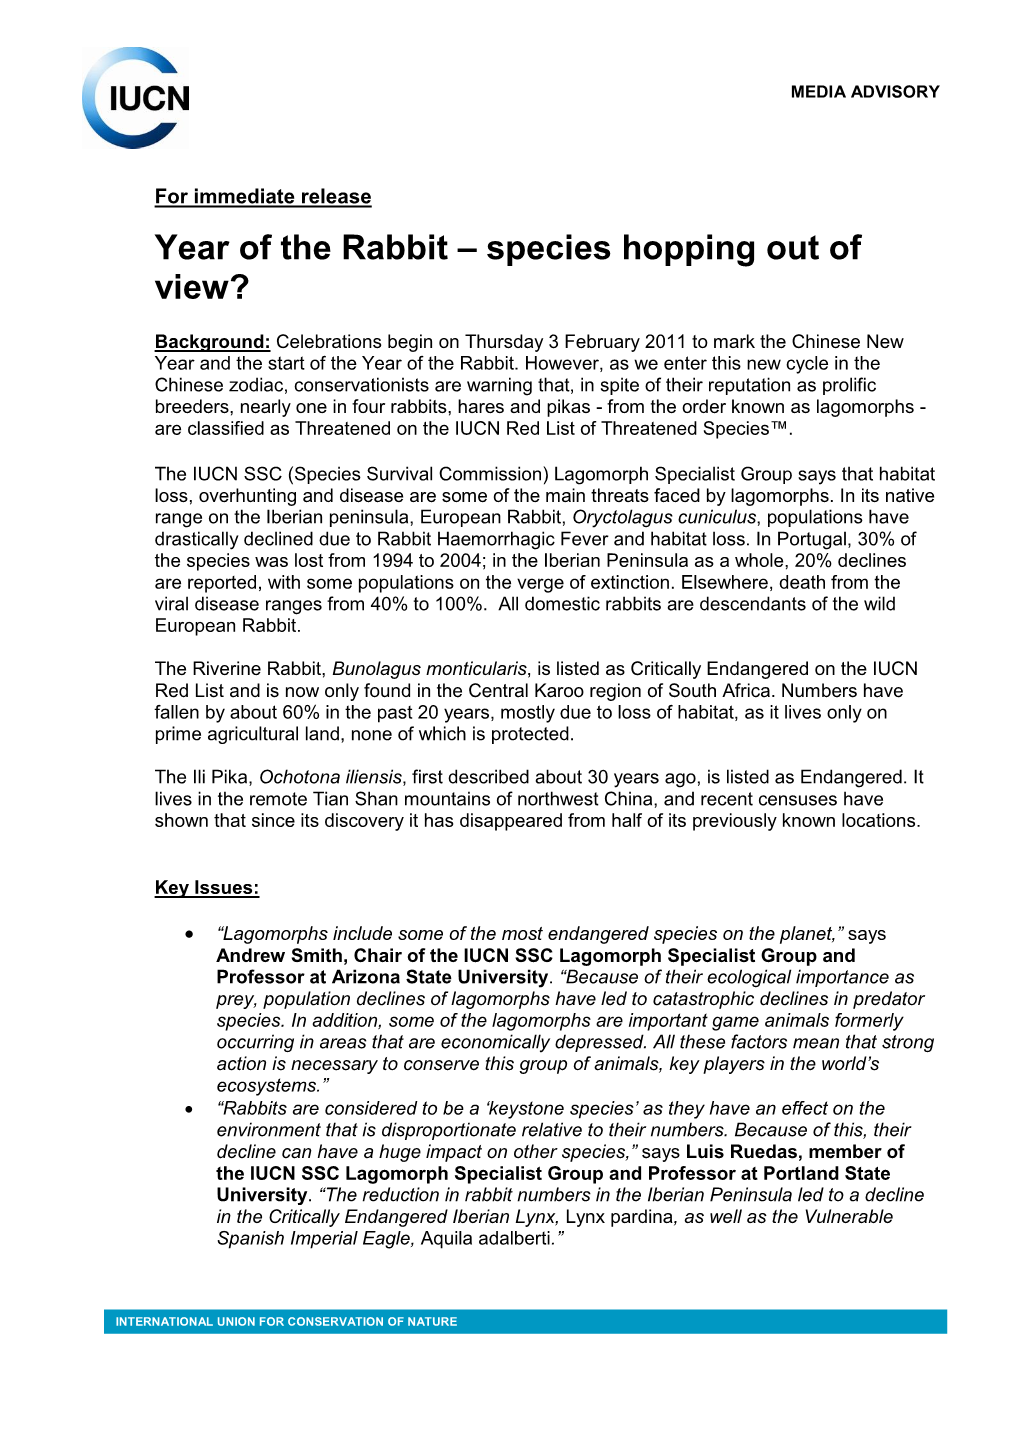 Year of the Rabbit – Species Hopping out of View?